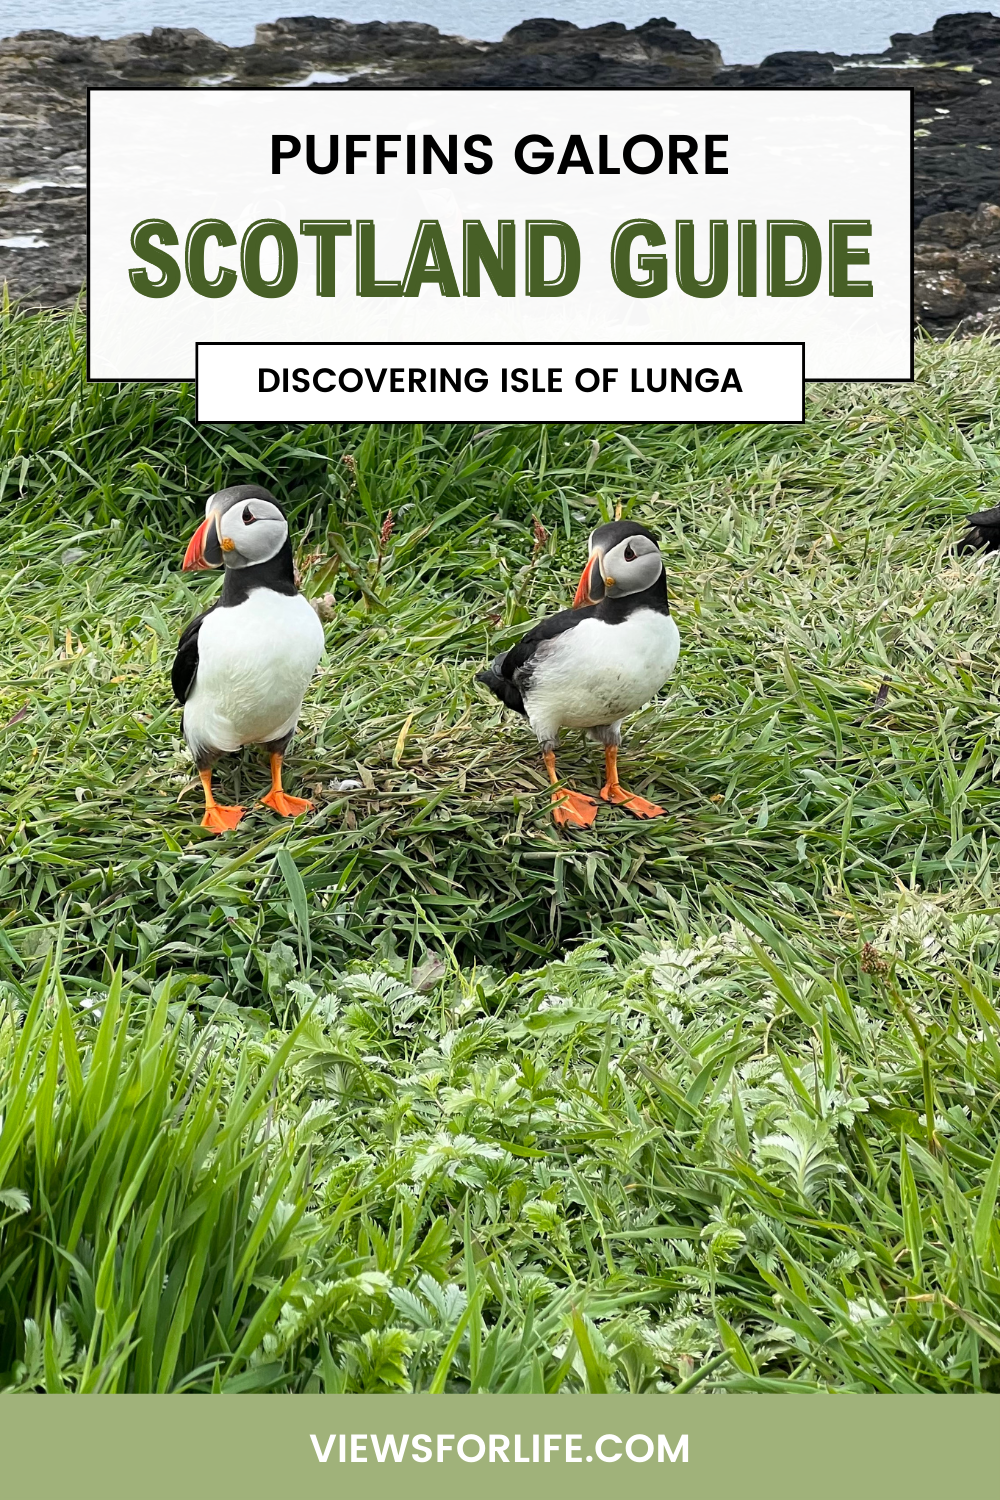 Puffins Galore: Discovering Isle of Lunga's Bird Sanctuary in Scotland (From Oban)